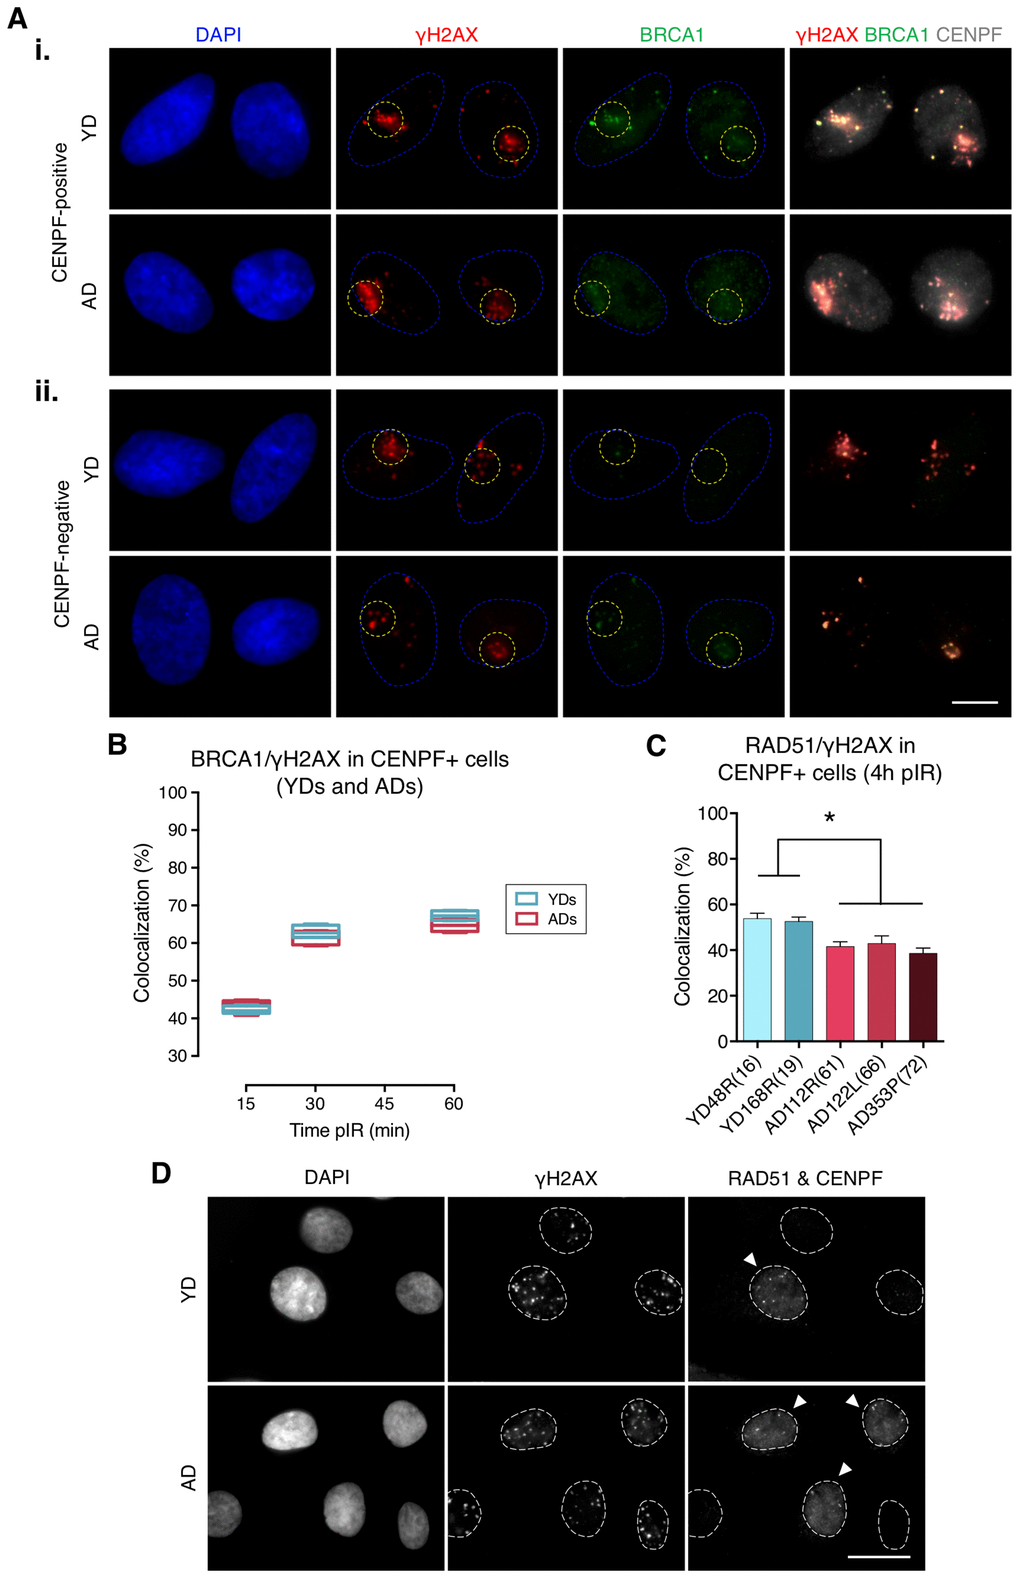 Recruitment of BRCA1 to DNA damage sites in G2 is not impaired in cells from aged donors. (A) Immunofluorescent labeling of cell nuclei (DAPI, blue), γH2AX (A594, red), BRCA1 (A488, green) and CENPF (A532, grey). γH2AX and BRCA1 foci were scored within the irradiated pore zone (yellow dotted lines) in CENPF-positive (i) or CENPF-negative (ii) cells. Scale bar = 10 μm. (B) Percentage of BRCA1/γH2AX foci colocalization in CENPF-positive HMECs from four YDs and four ADs. Boxes include data from the upper to the lower quartile and whiskers compile minimum to maximum values (n is stated in Supplementary Table 3). (C) Percentage of RAD51/γH2AX foci colocalization in CENPF-positive cells at 4 h after irradiation (5 Gy, γ-rays). Error bars indicate SEM (* p n ≥ 500 γH2AX foci/donor; one-way ANOVA + Tukey). (D) Immunofluorescent labeling of cell nuclei (DAPI), γH2AX (A488), RAD51 (A594) and CENPF nuclear staining (A532) at 4 h after exposure to 5 Gy of γ-rays. Arrowheads indicate G2 (CENPF-positive) cells. Scale bar = 20 μm.